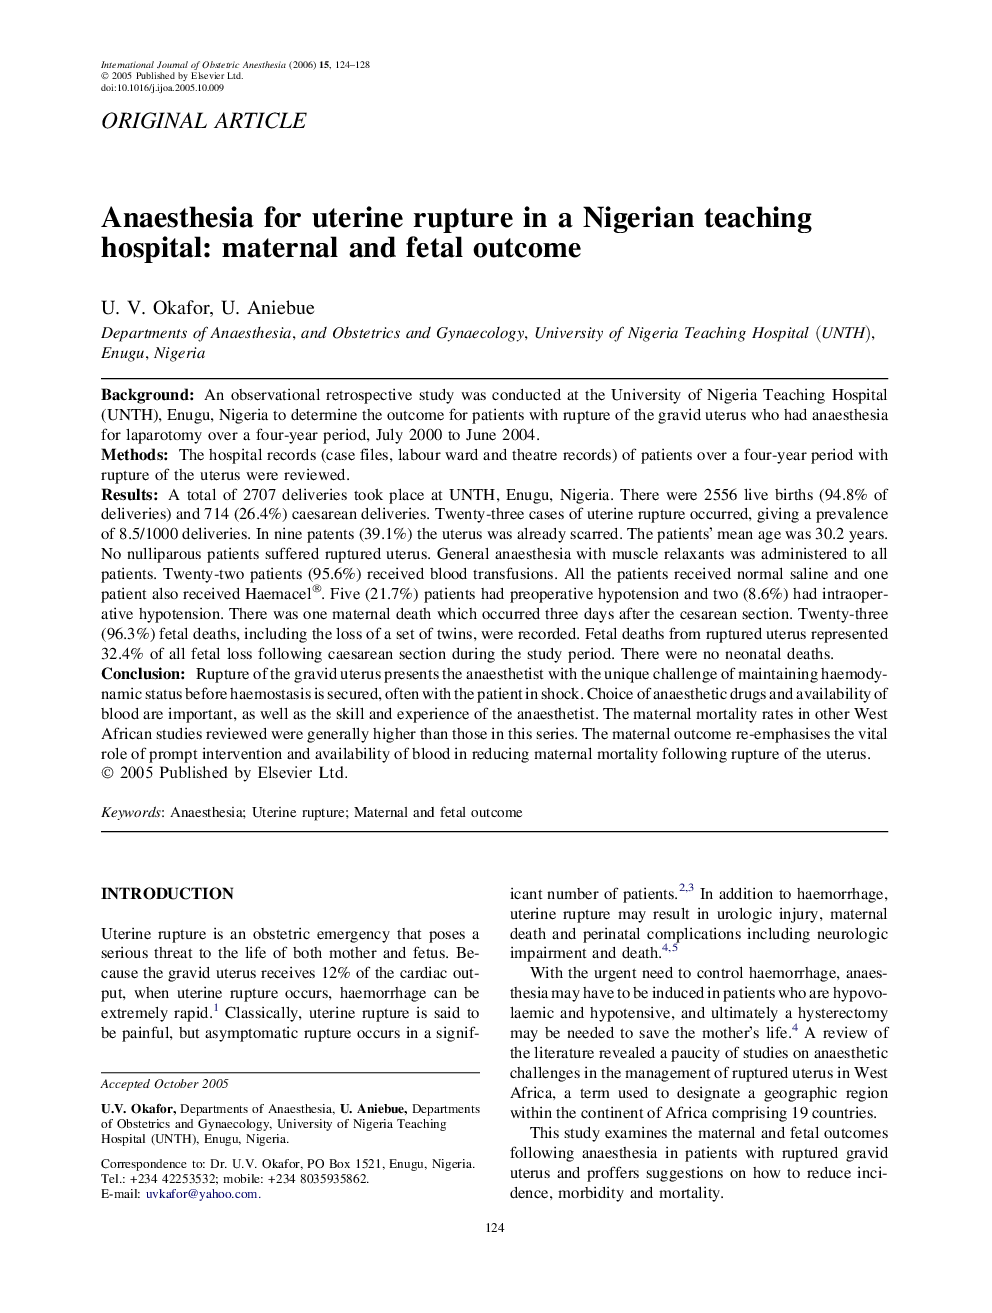 Anaesthesia for uterine rupture in a Nigerian teaching hospital: maternal and fetal outcome